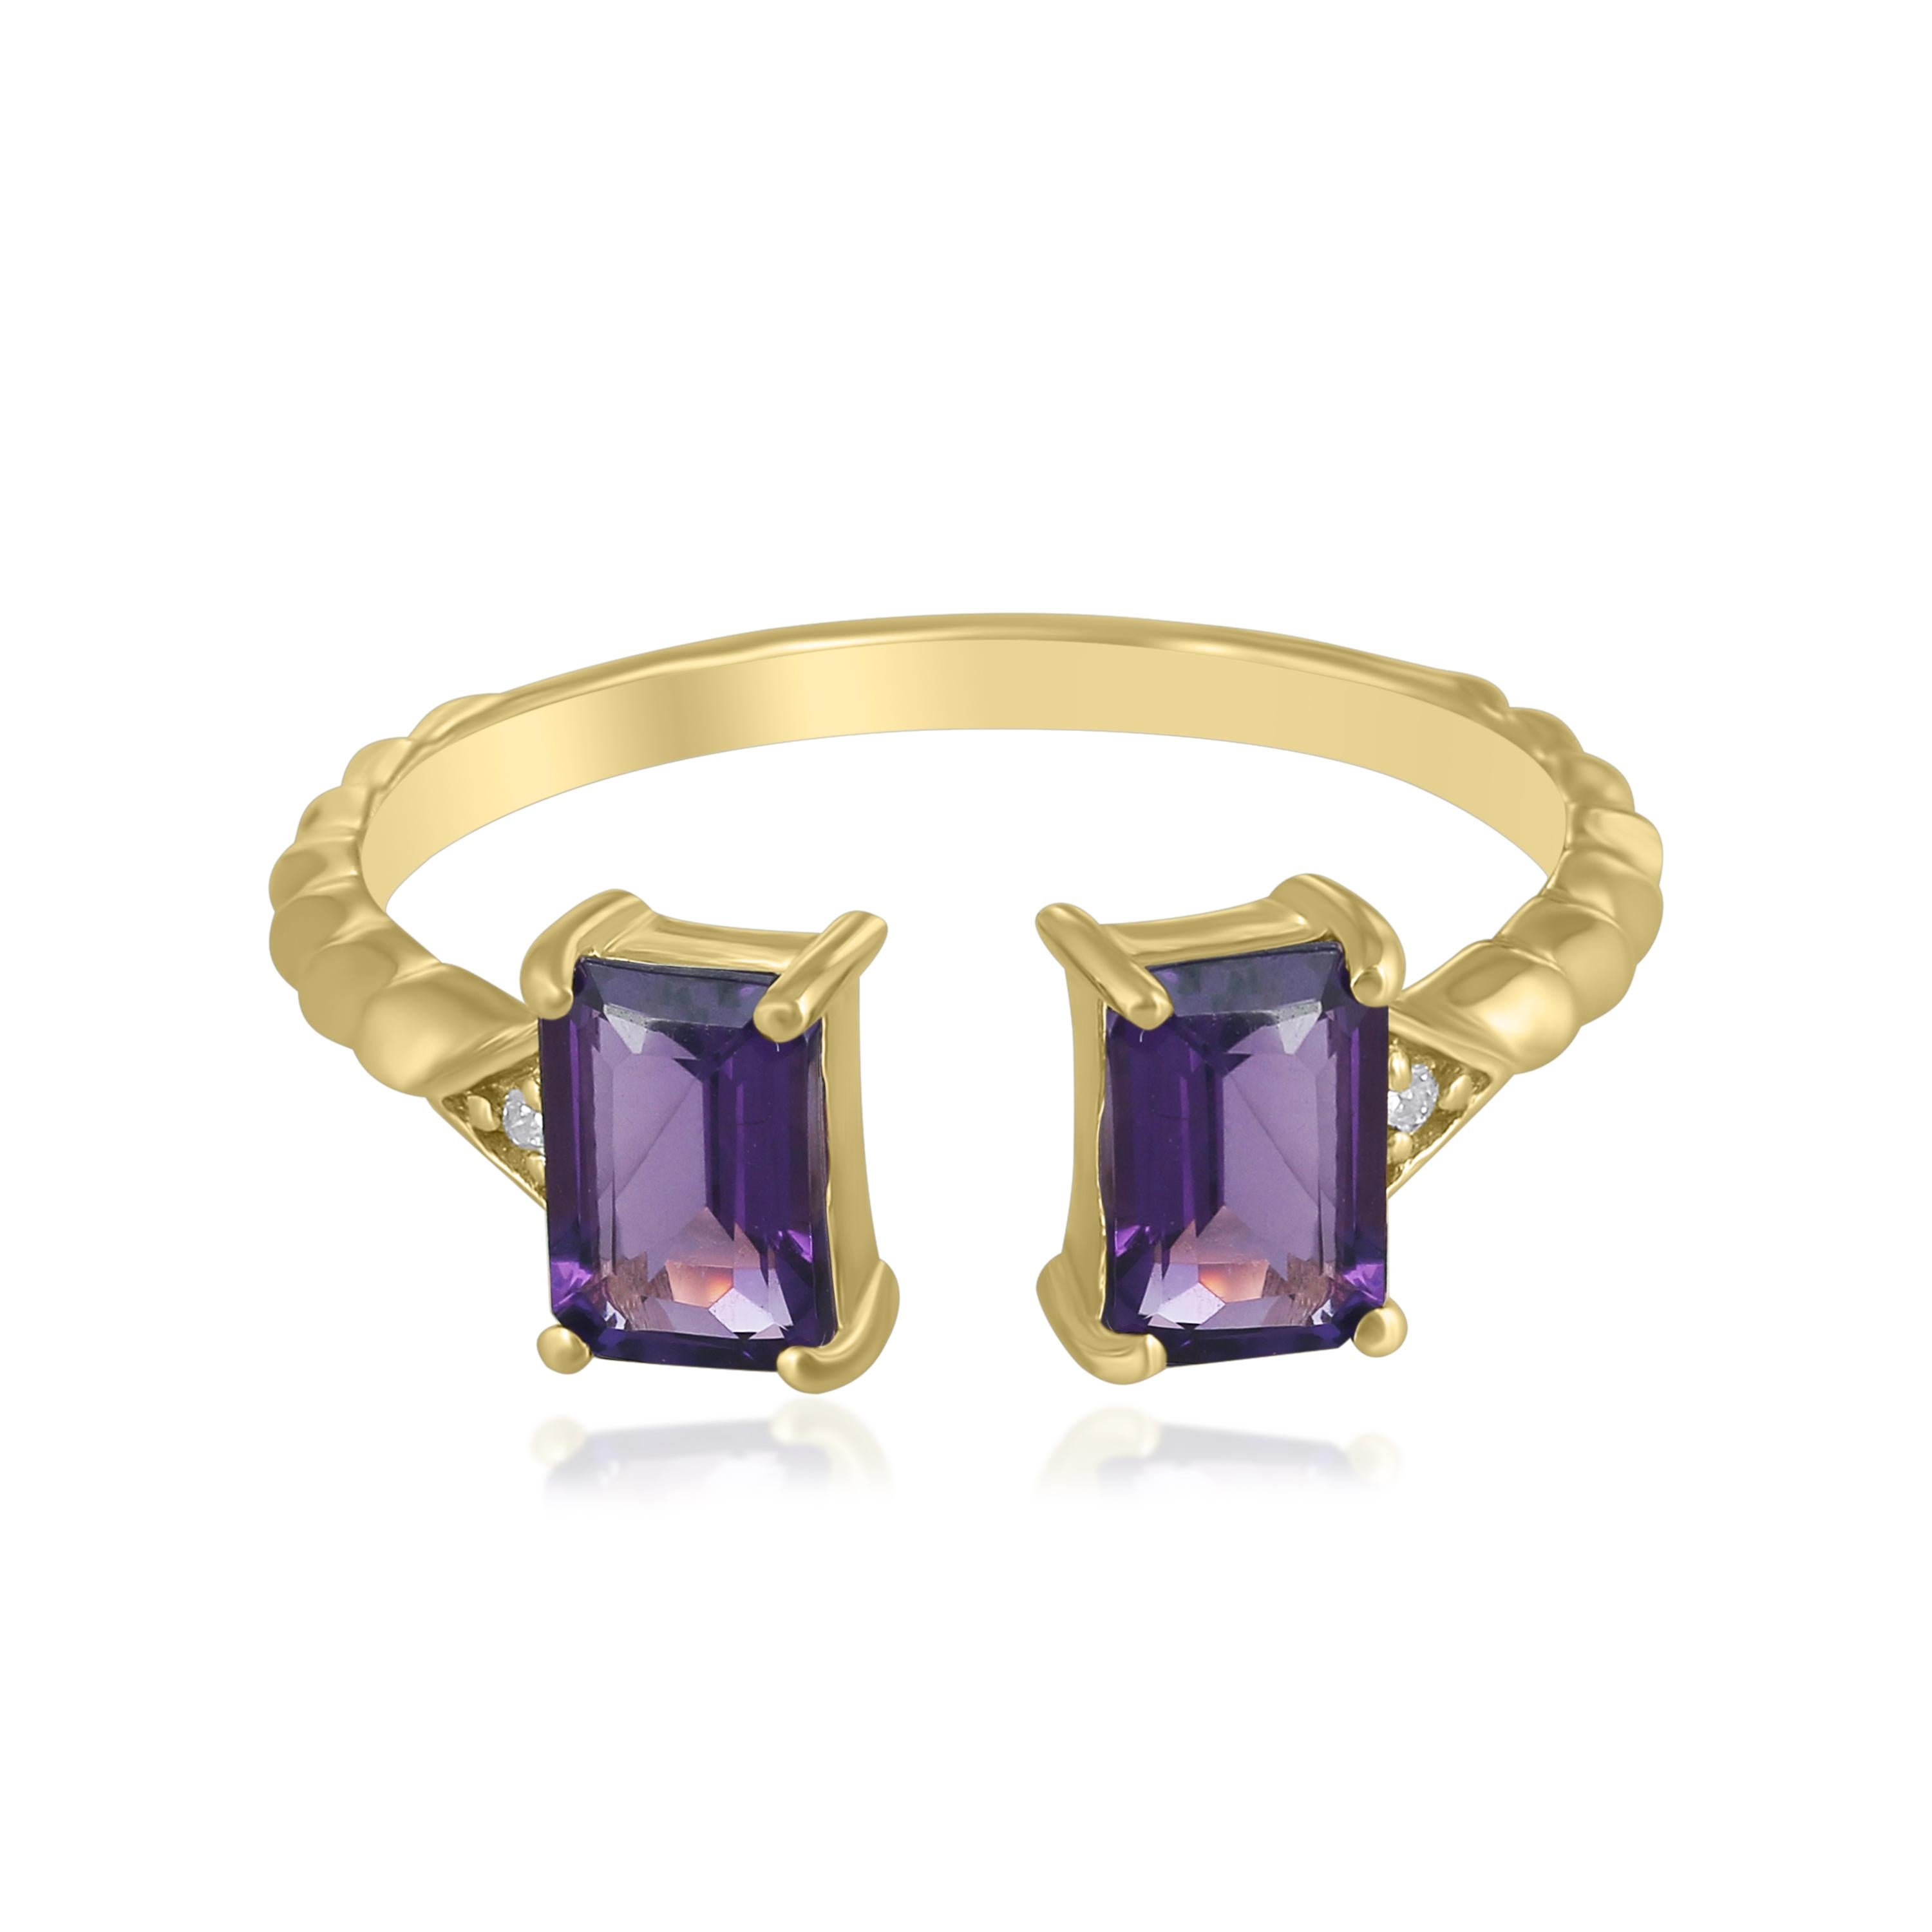 Octagon Cut Gemistry 1.12 Cttw. Amethyst and Diamond Cuff Ring in 14K Yellow Gold For Sale